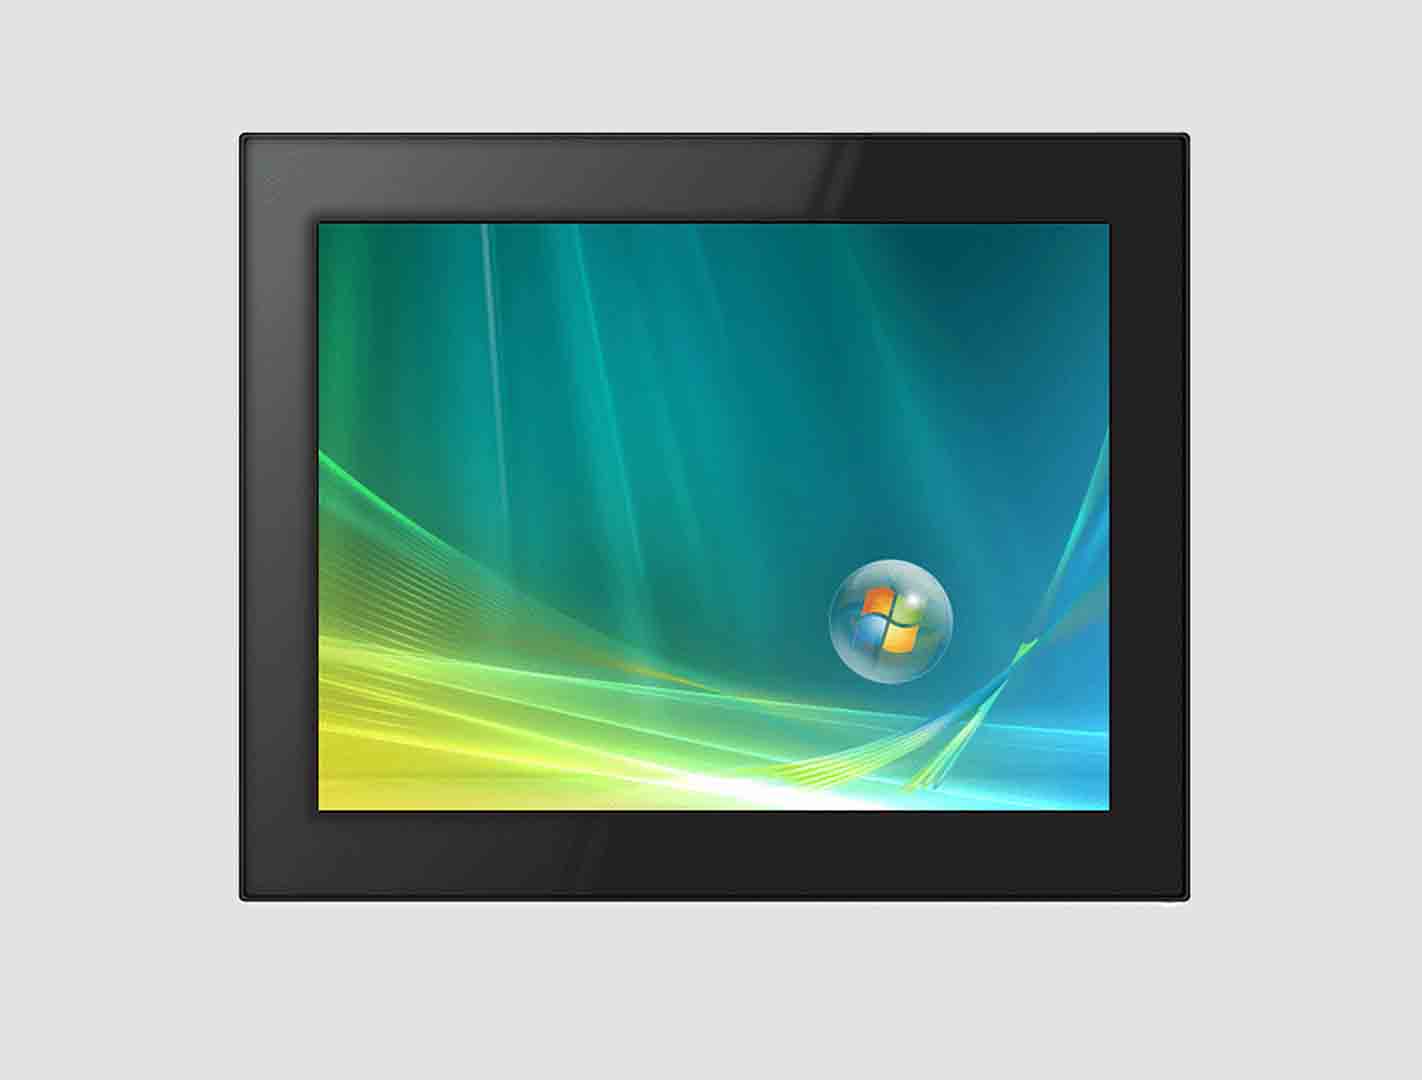 PoE Industrial Touch Screen Panel PC